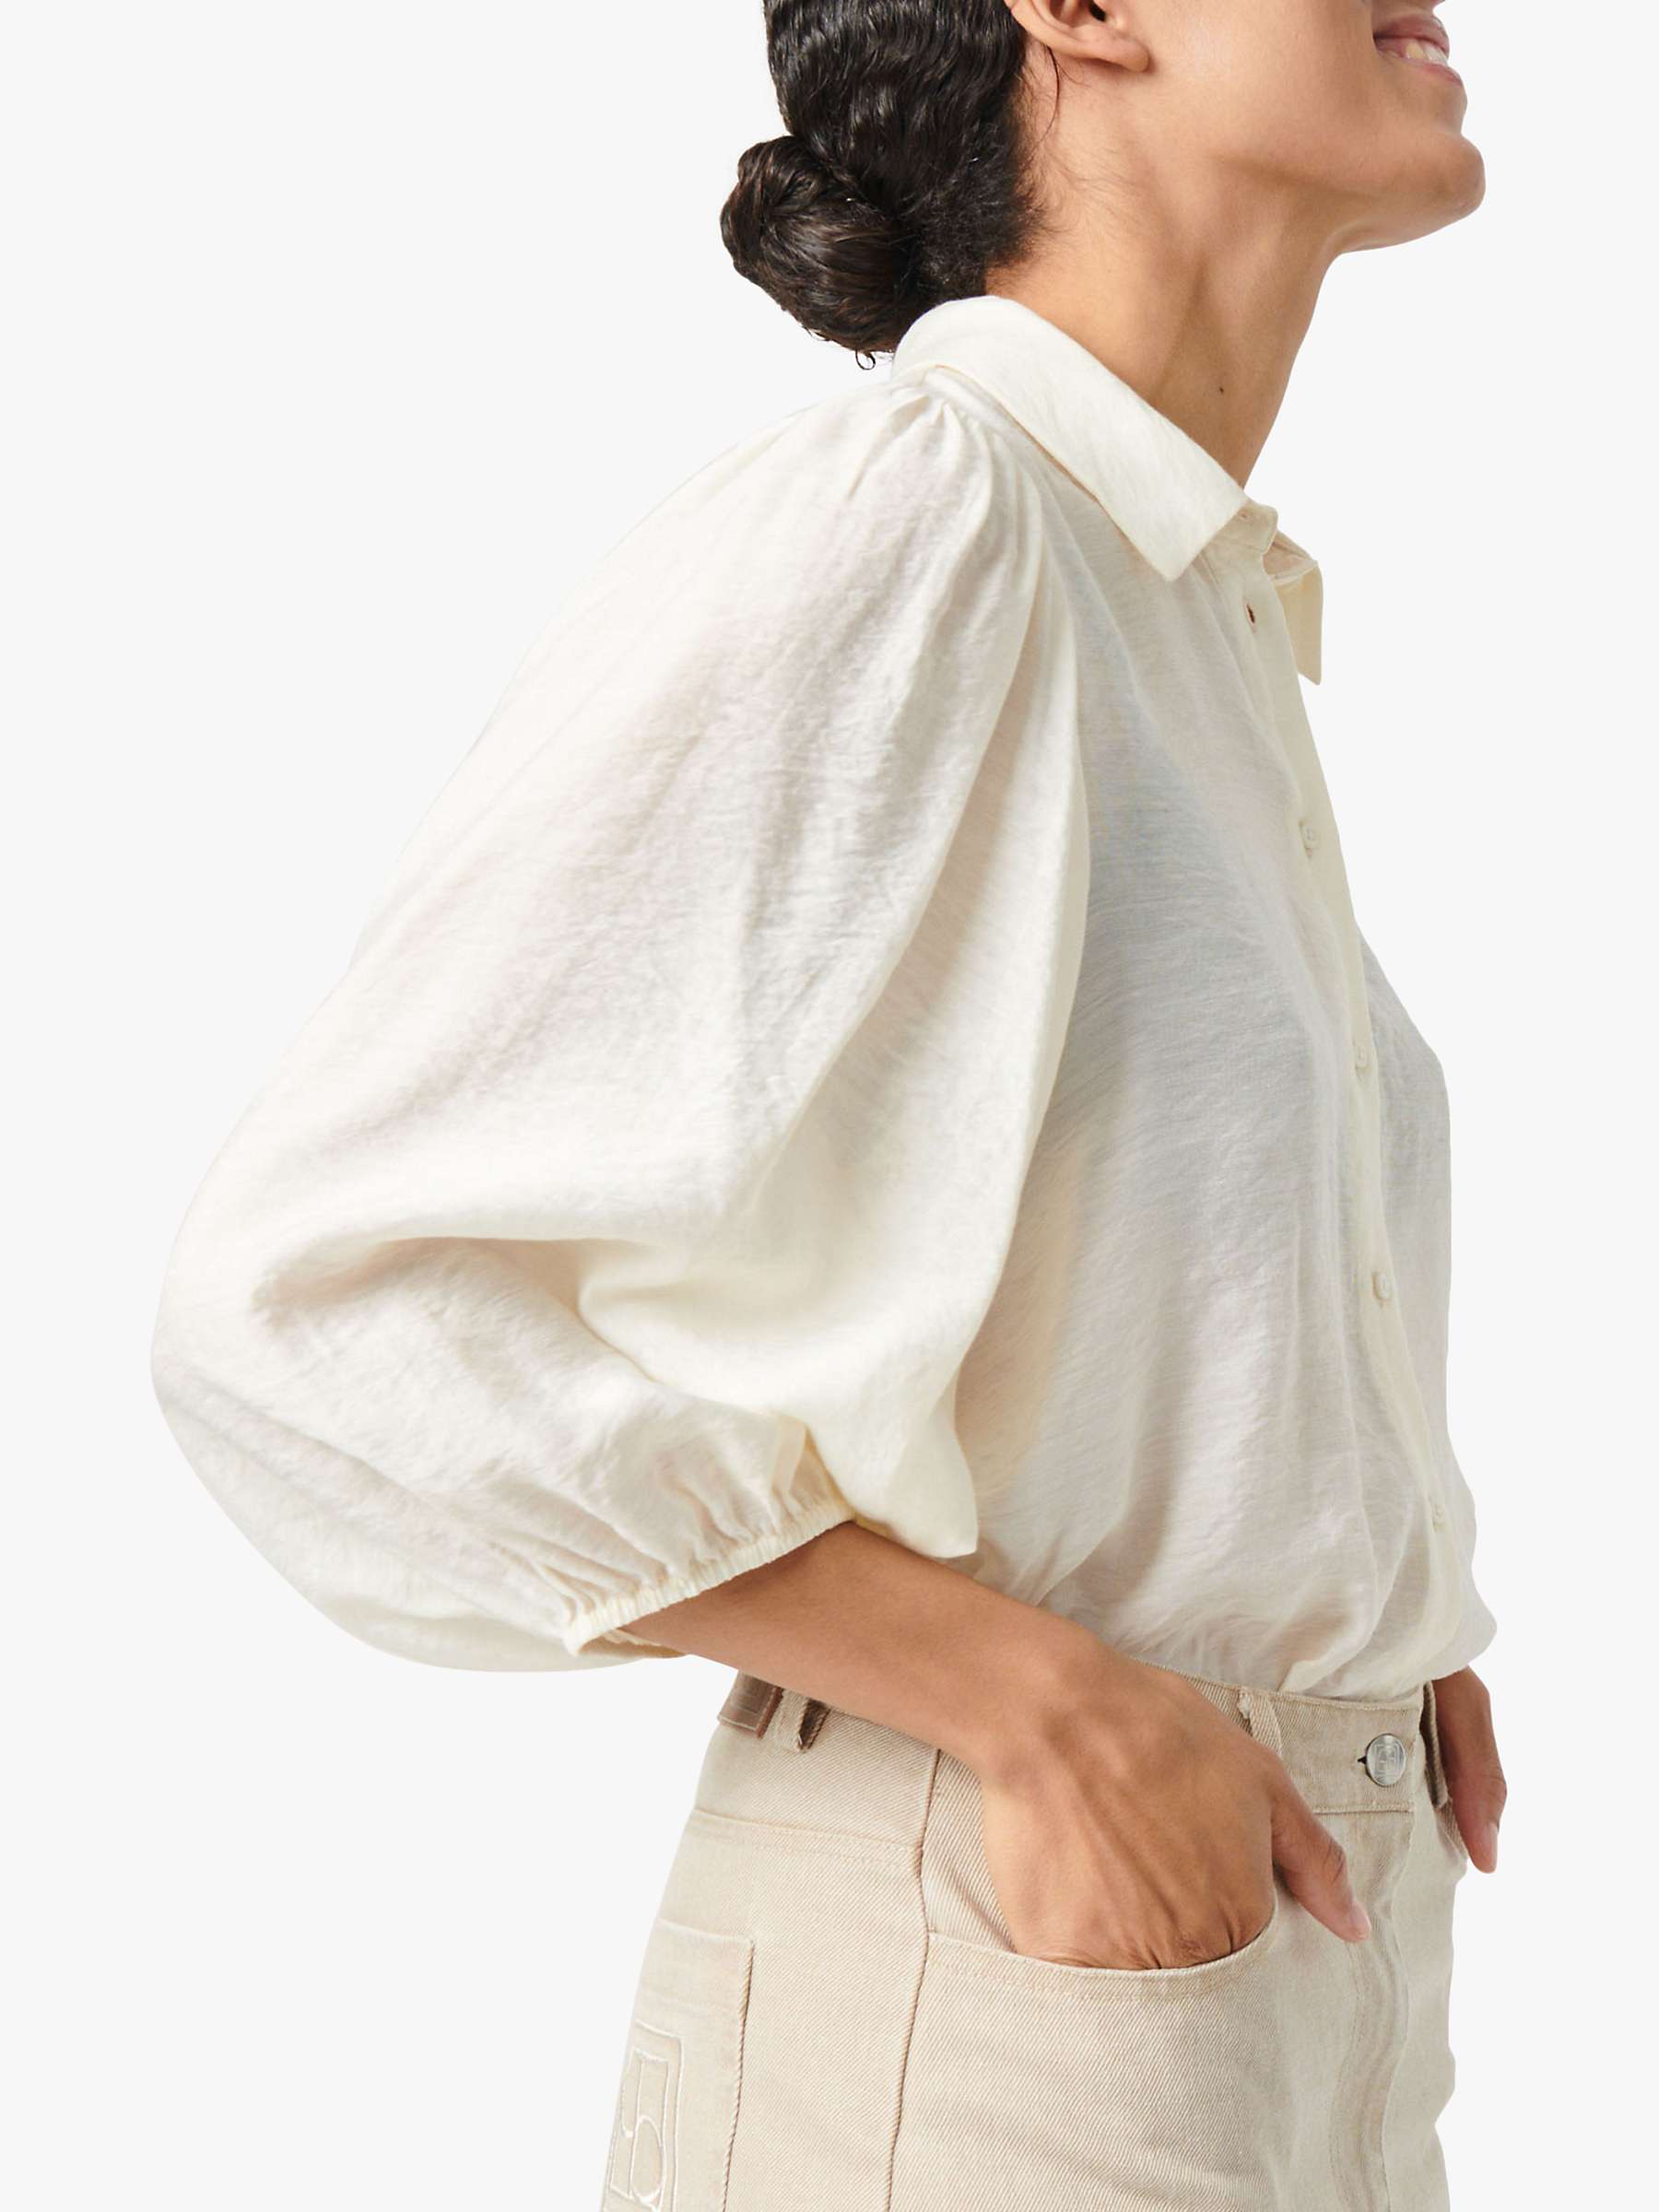 Buy Soaked In Luxury Leodora Cropped Sleeve Buttons Shirt Online at johnlewis.com